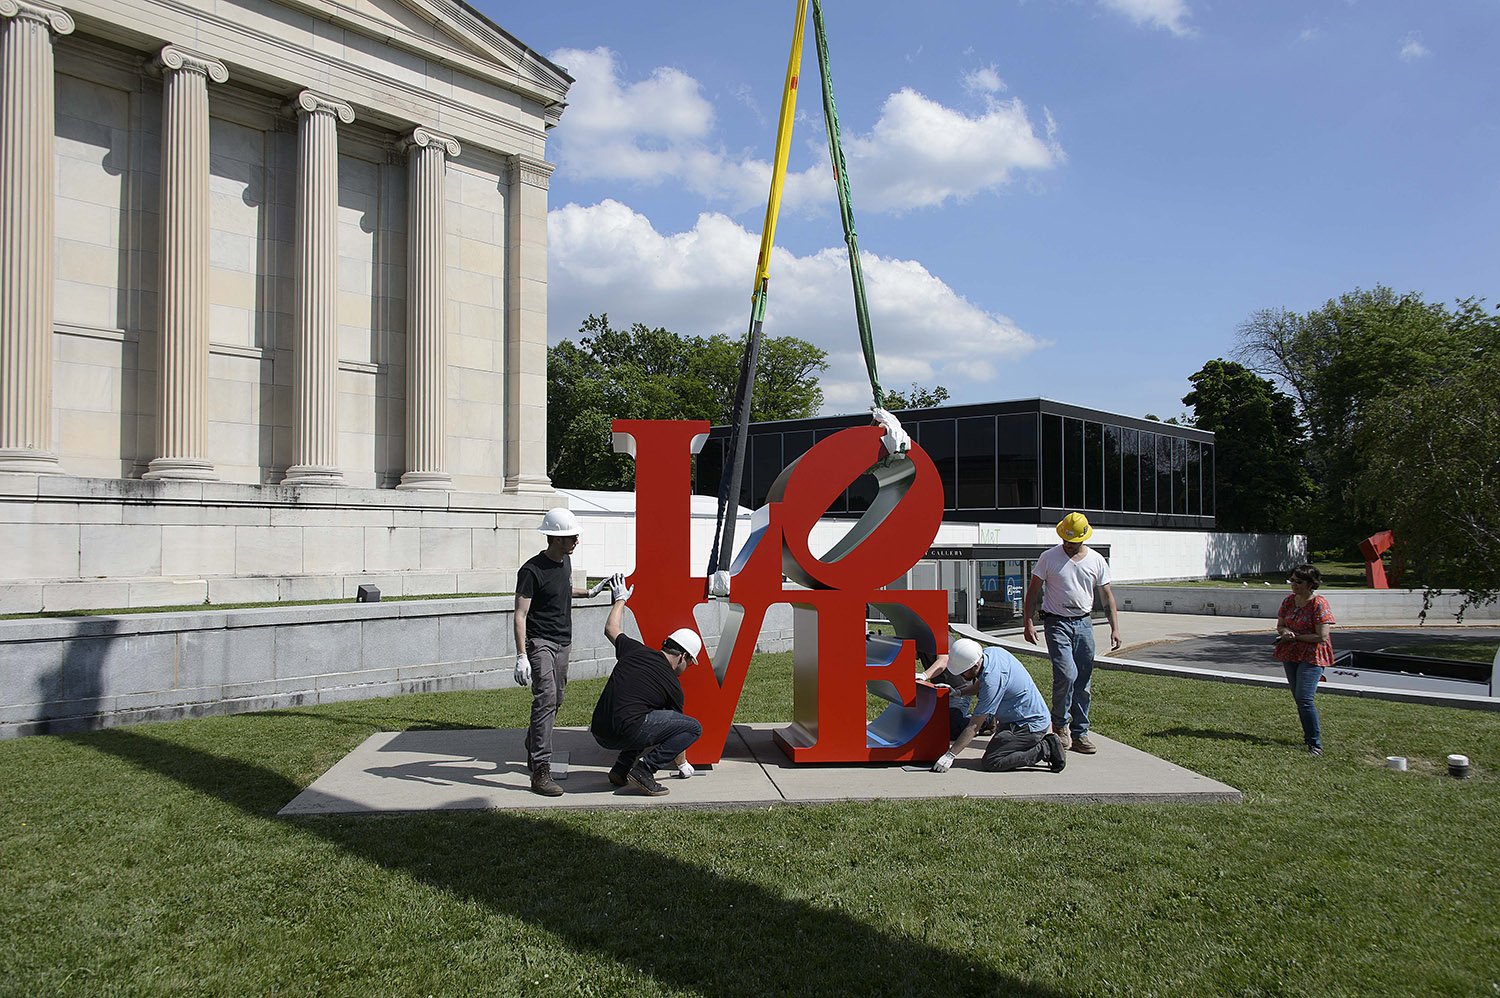  Lowering a Robert Indiana sculpture into place with a team of preparators, registrars, and contractors. 